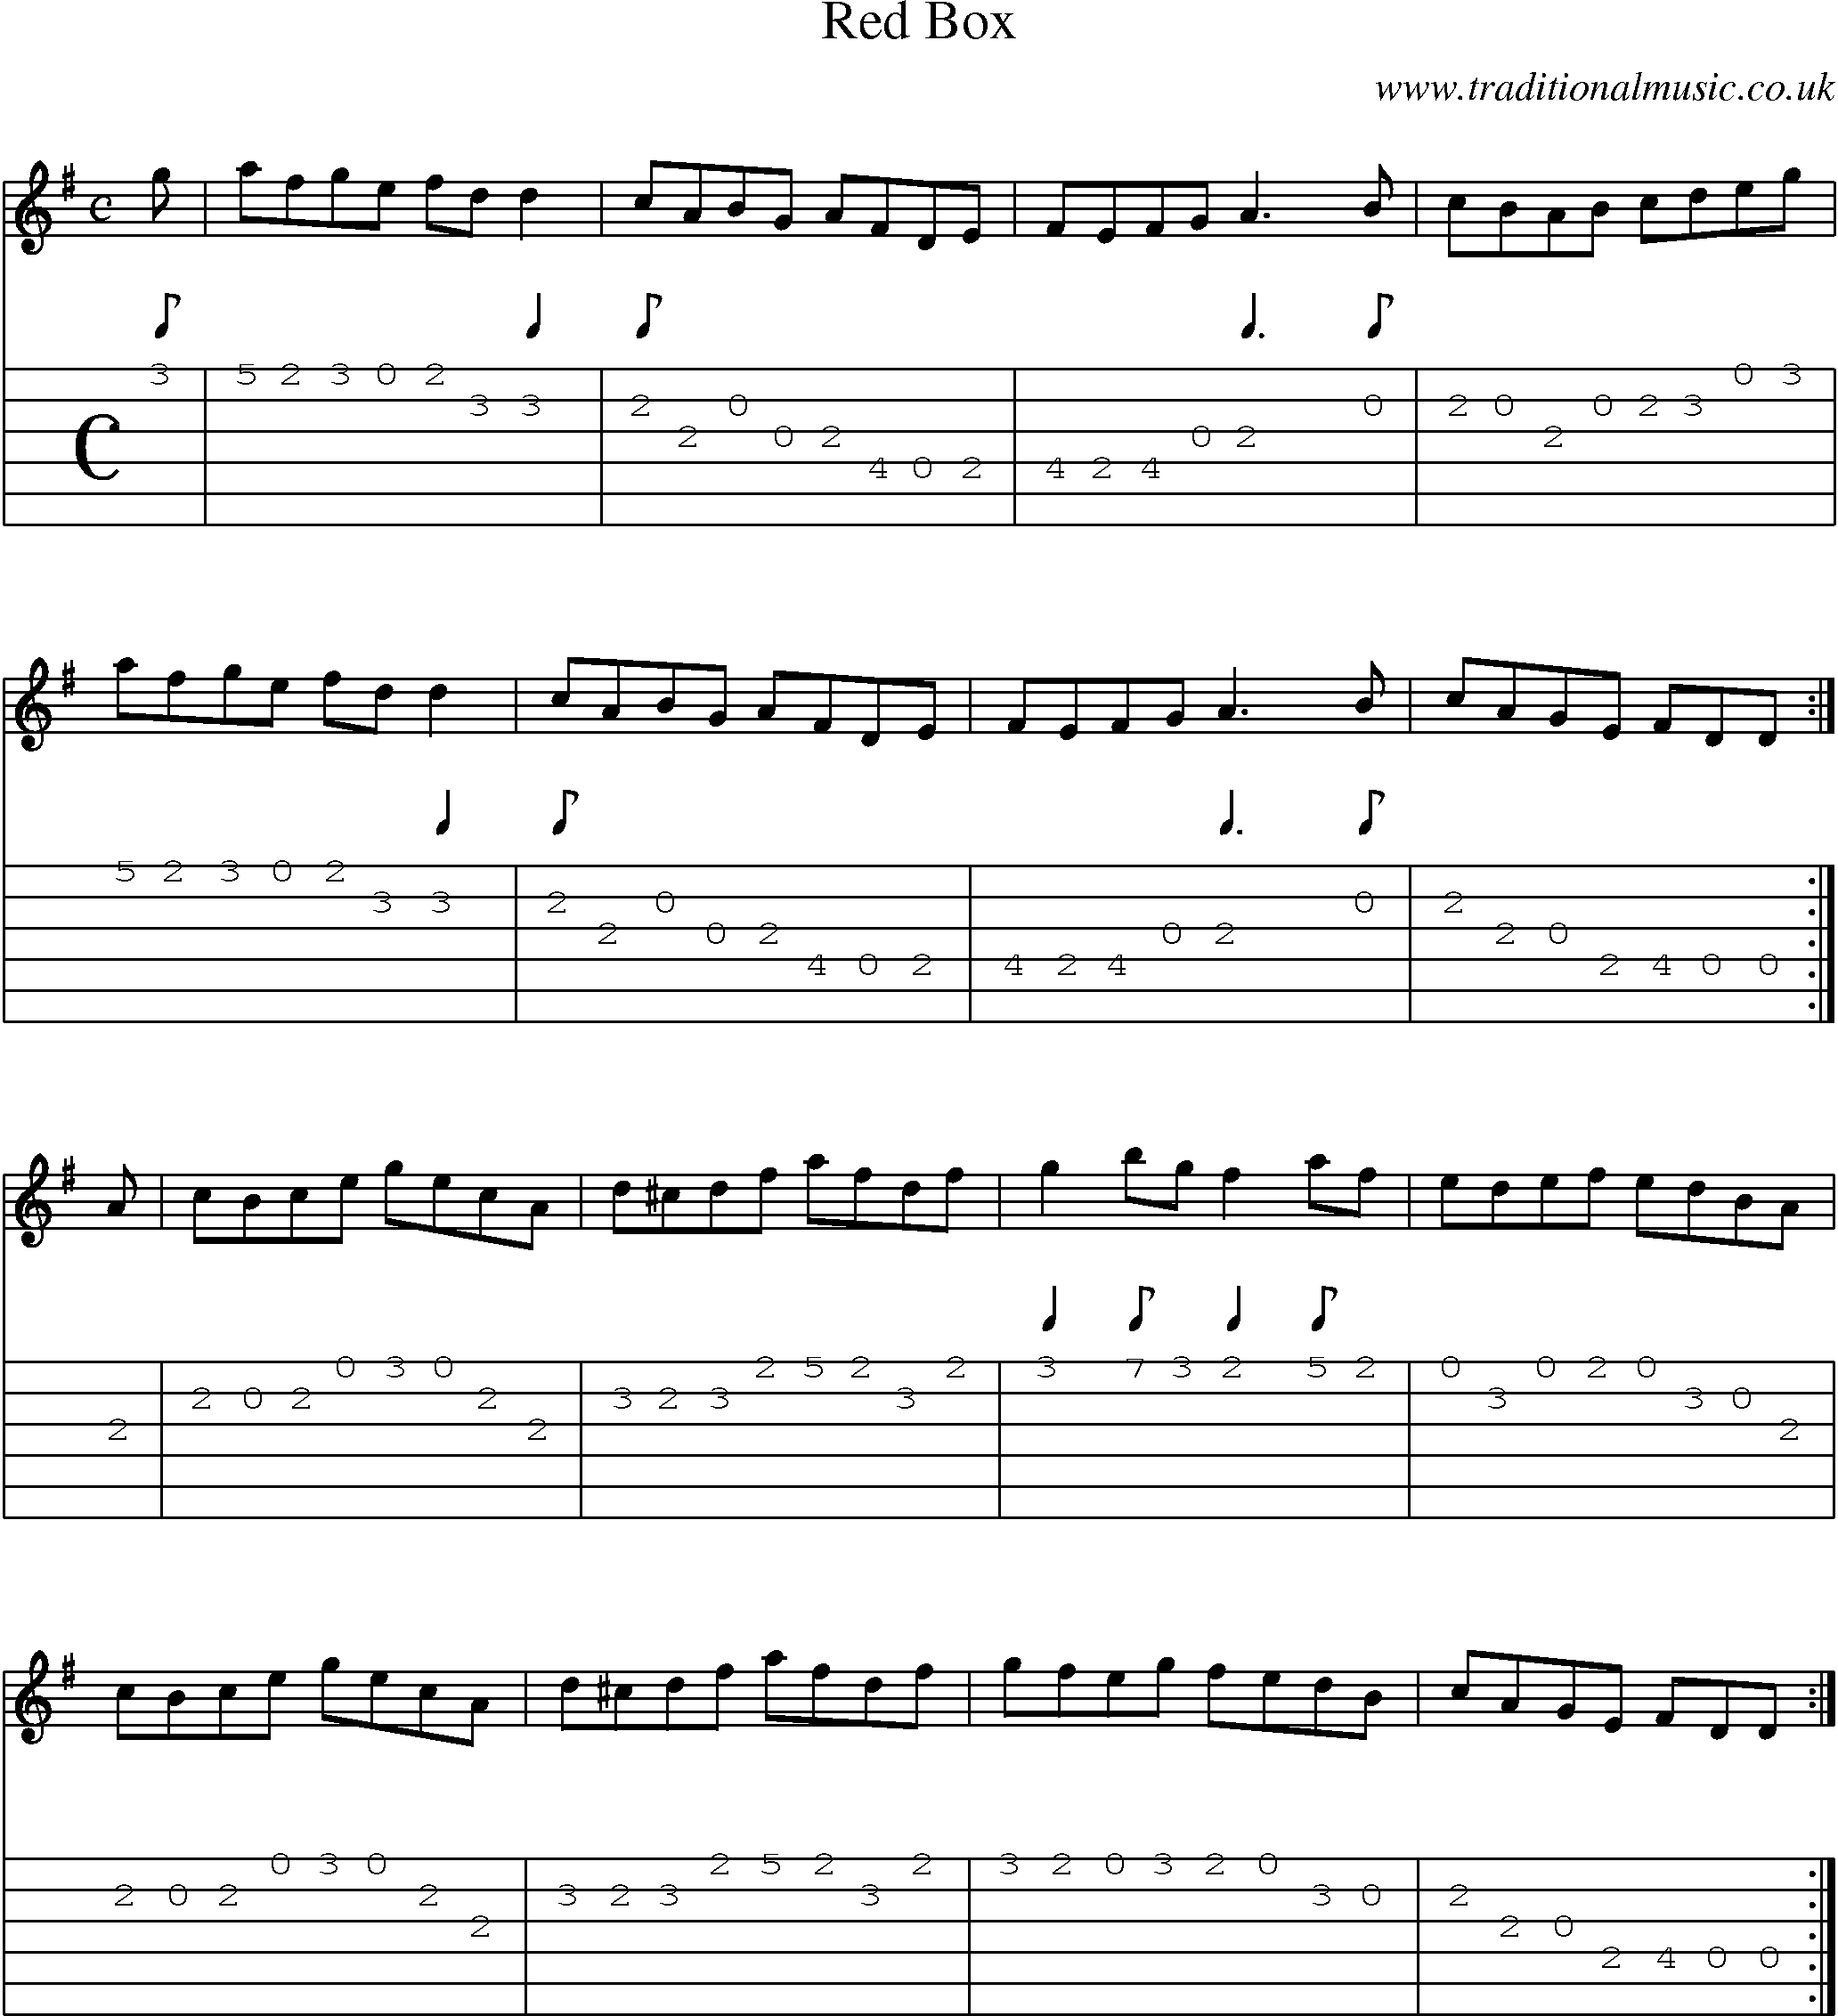 Music Score and Guitar Tabs for Red Box